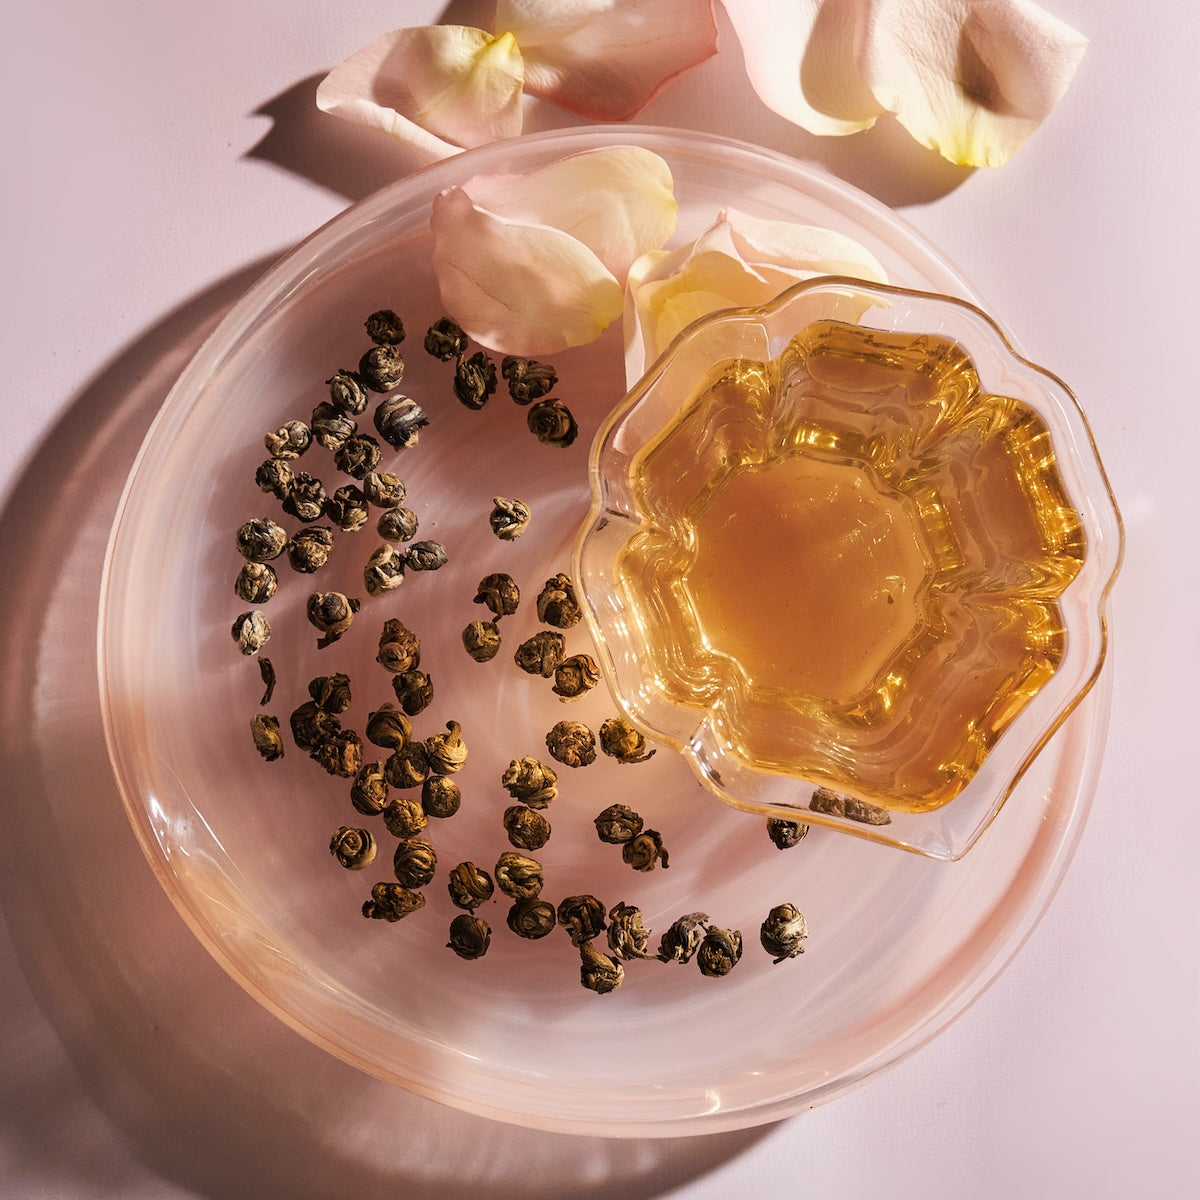 A glass cup of tea sits on a light pink plate, with hand-rolled white tea leaves scattered nearby. Pink flower petals are placed around the plate, creating a delicate arrangement. The lighting casts soft shadows, adding a warm and inviting ambiance that complements the exquisite taste of Magic Hour White Tea Pearls.